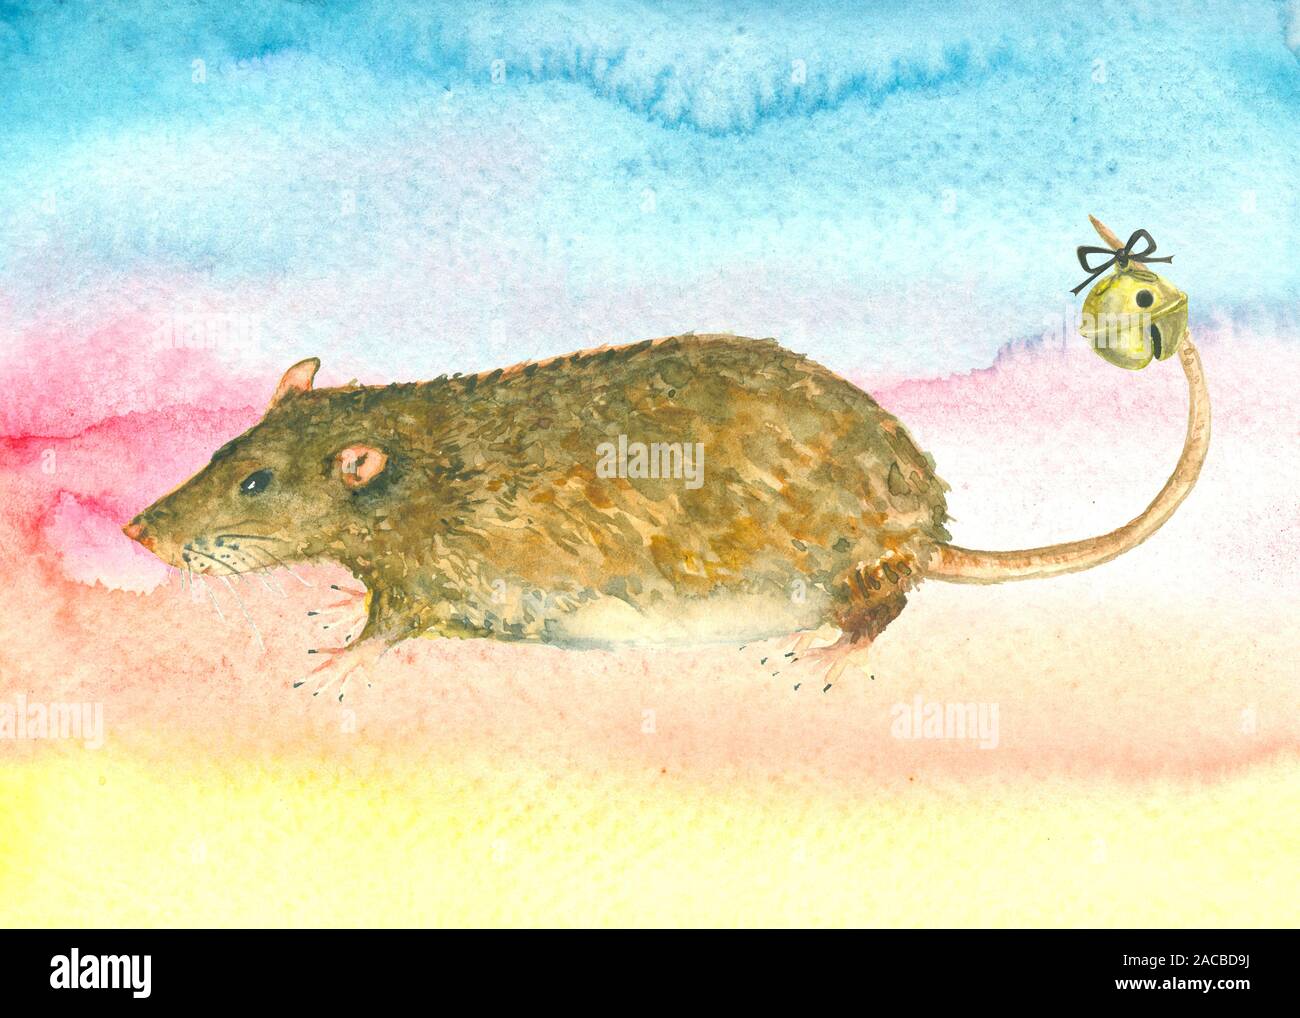 Oriental new year symbol - Rat with bell on its tail and gardient watercolor background Stock Photo